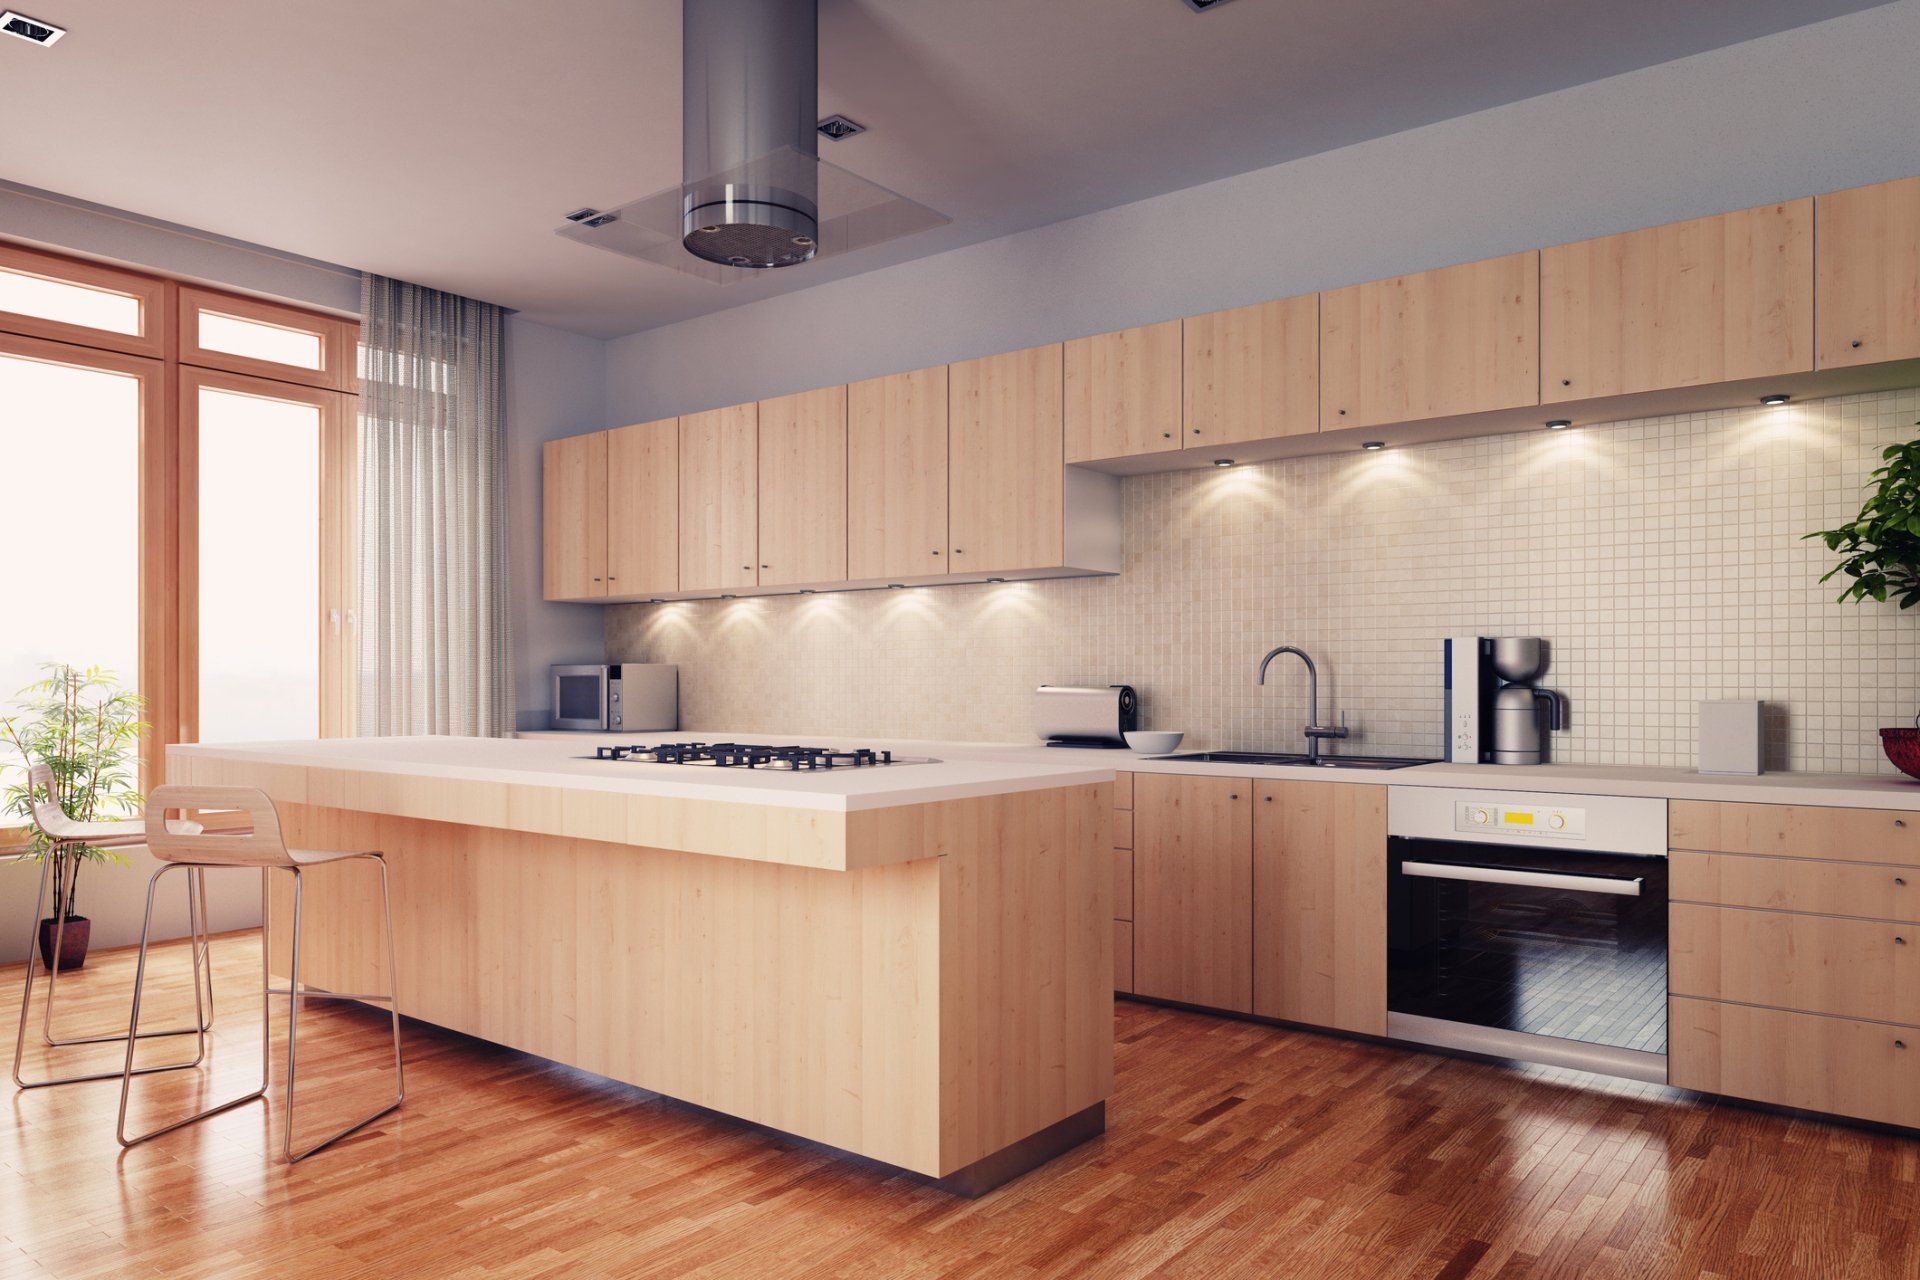 Modernized Kitchen with Wooden Color - Fort Worth, TX - At Your Service Flooring